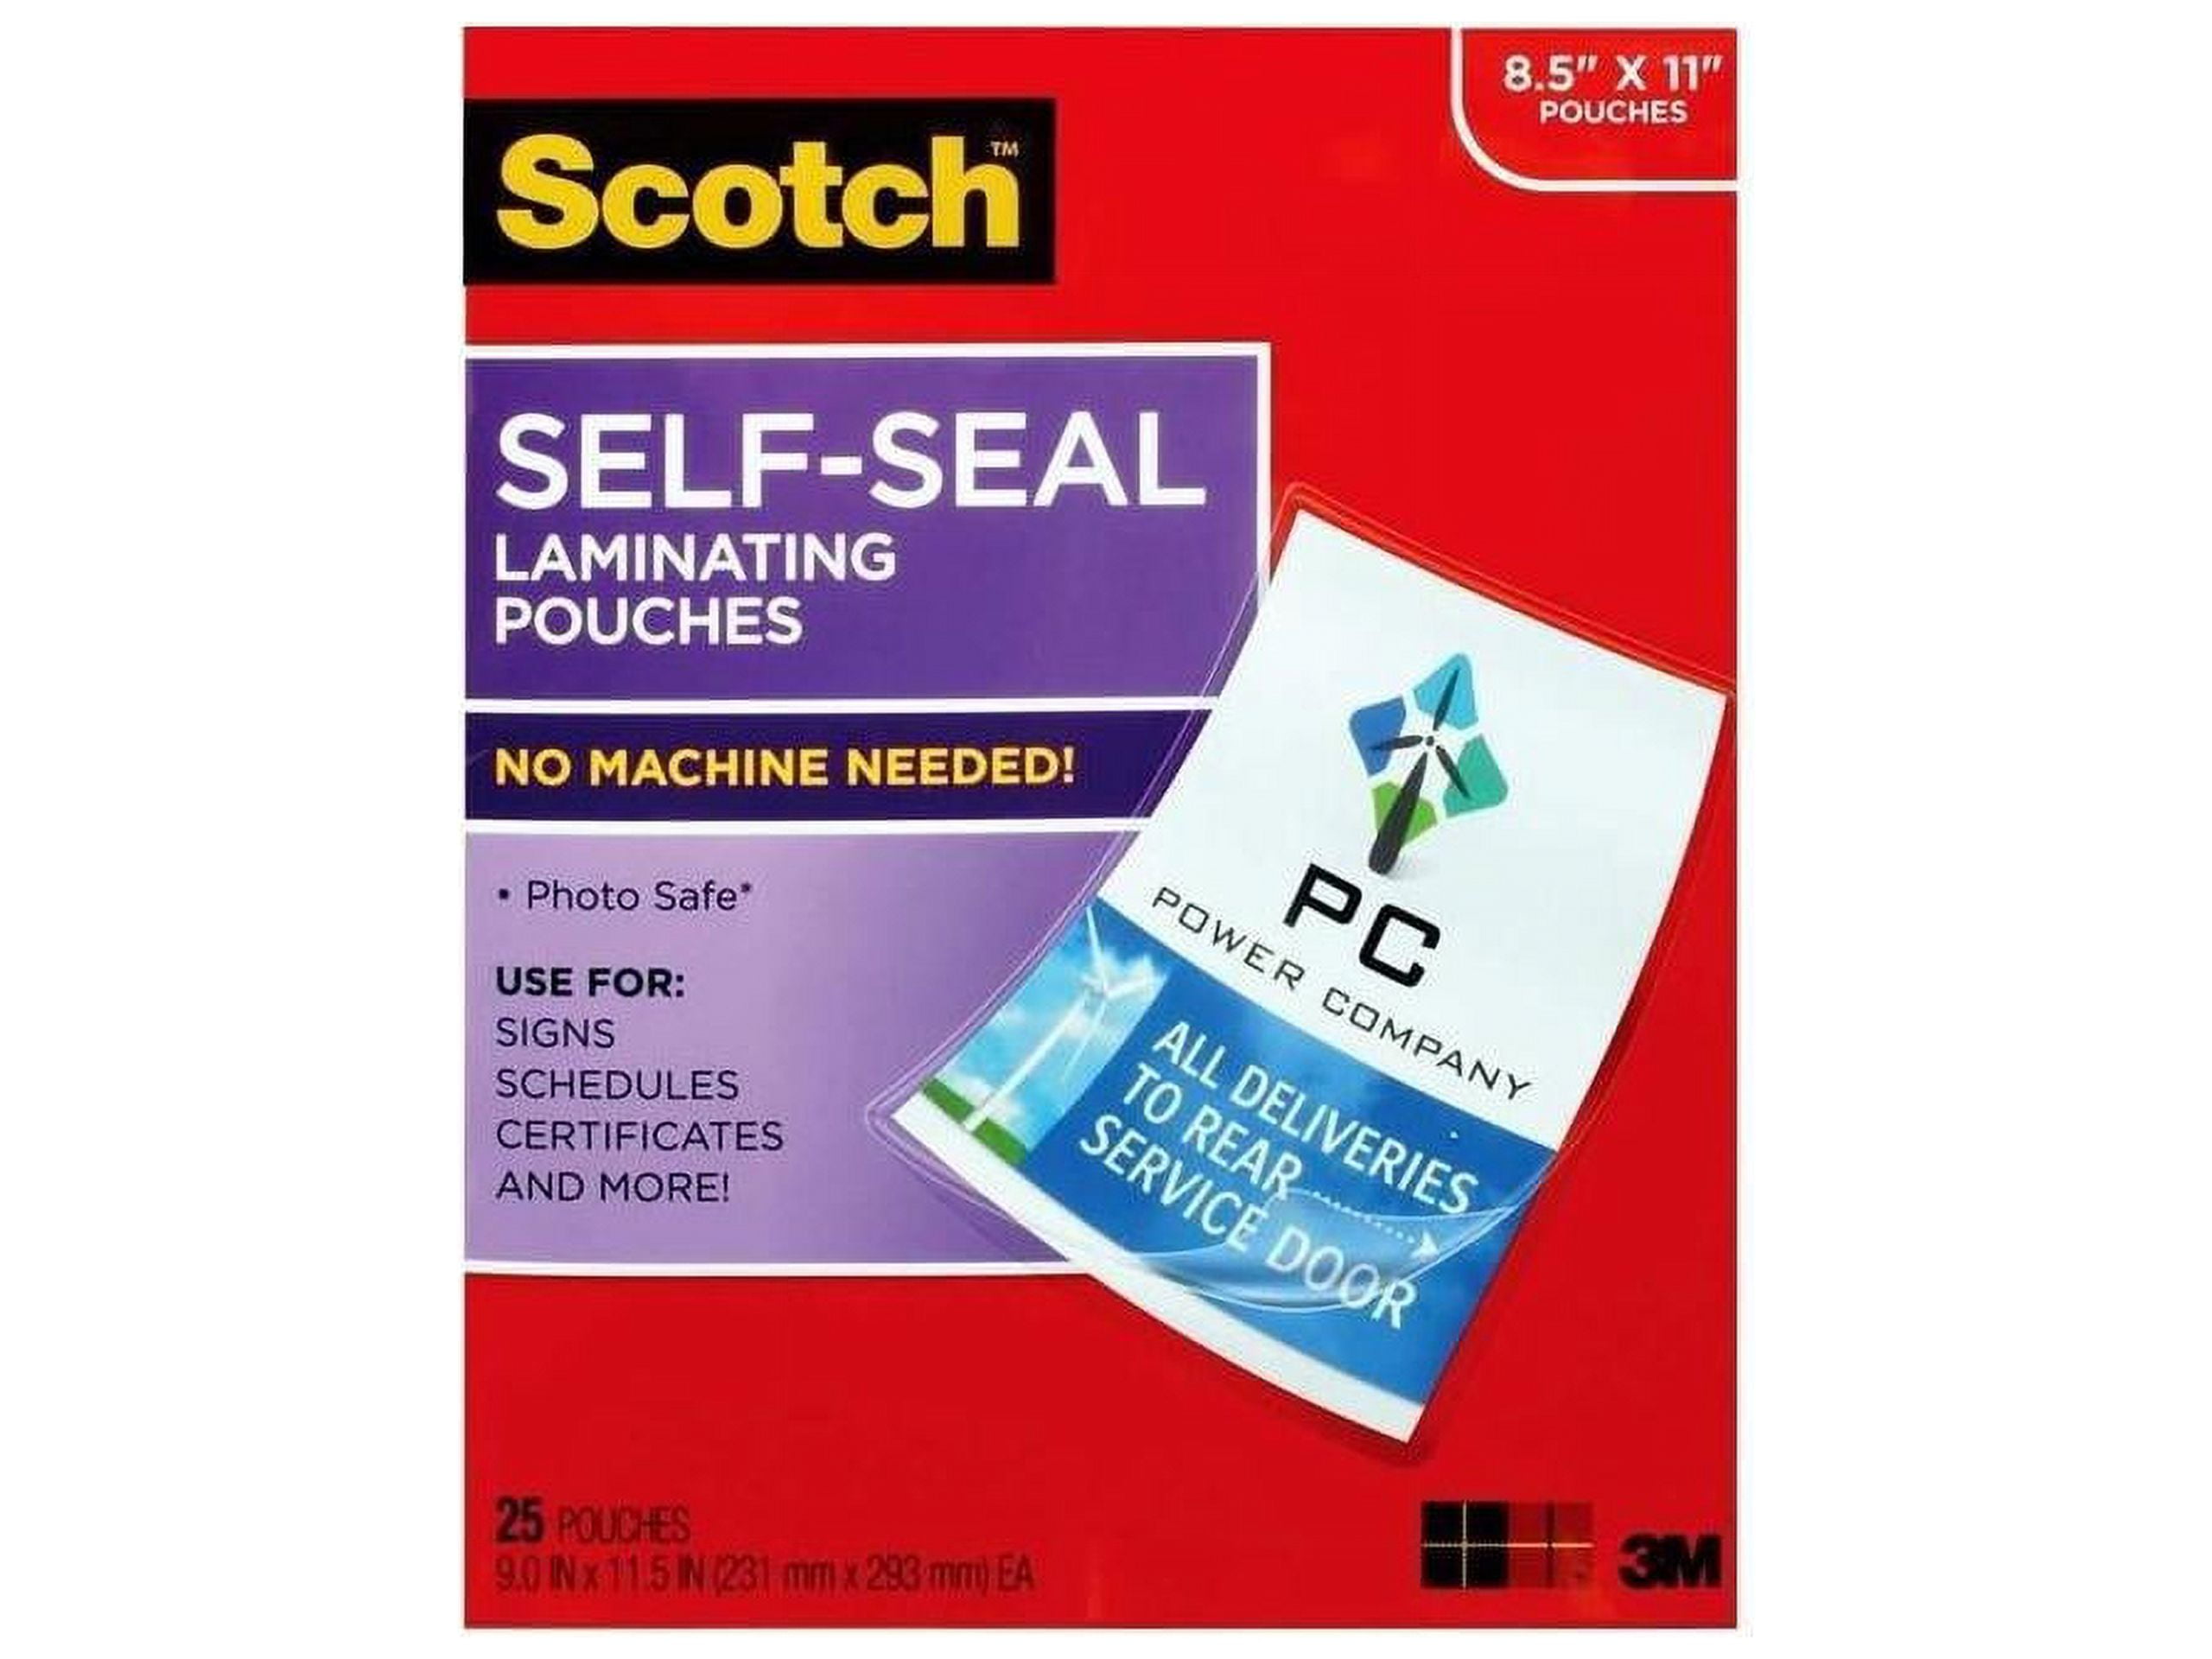 XFasten Self-Adhesive Laminating Sheets, 9 x 12 Inches (50-Pack), 4.76  Thickness (50-Pack) 9-Inches x 12-Inches